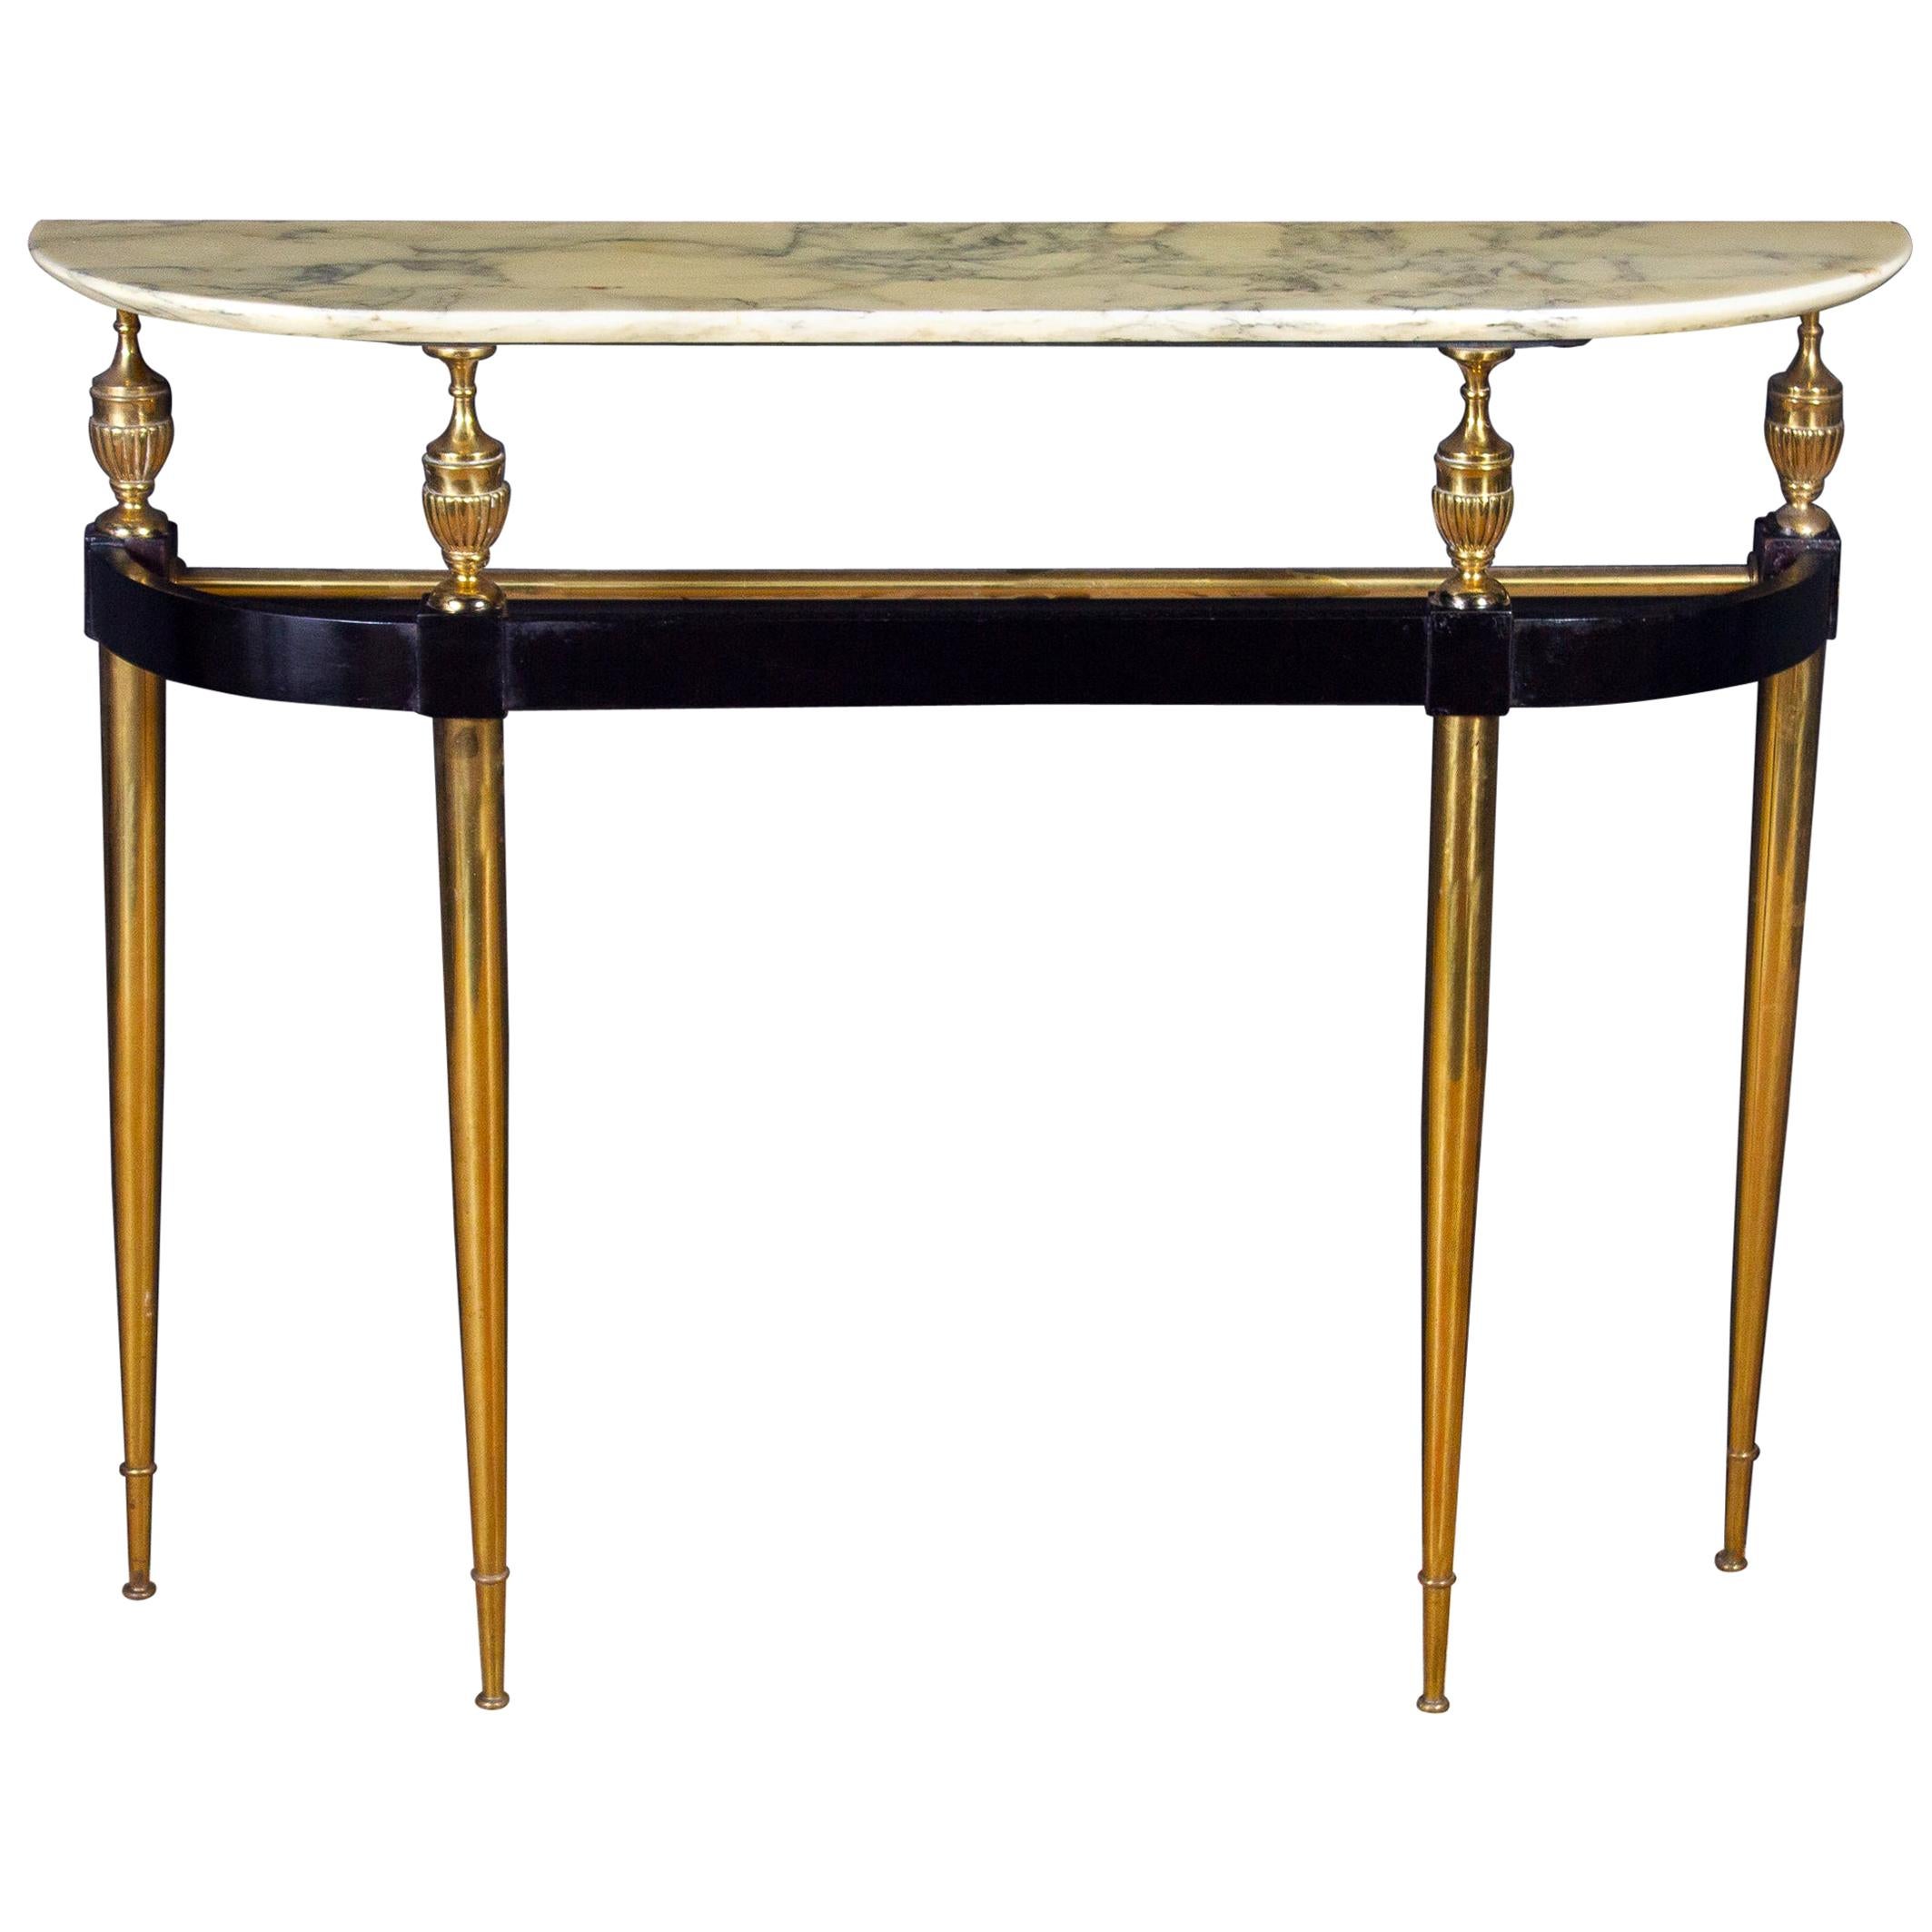 Midcentury Oval Shaped Gilt Bronze Console Table Italy, 1950